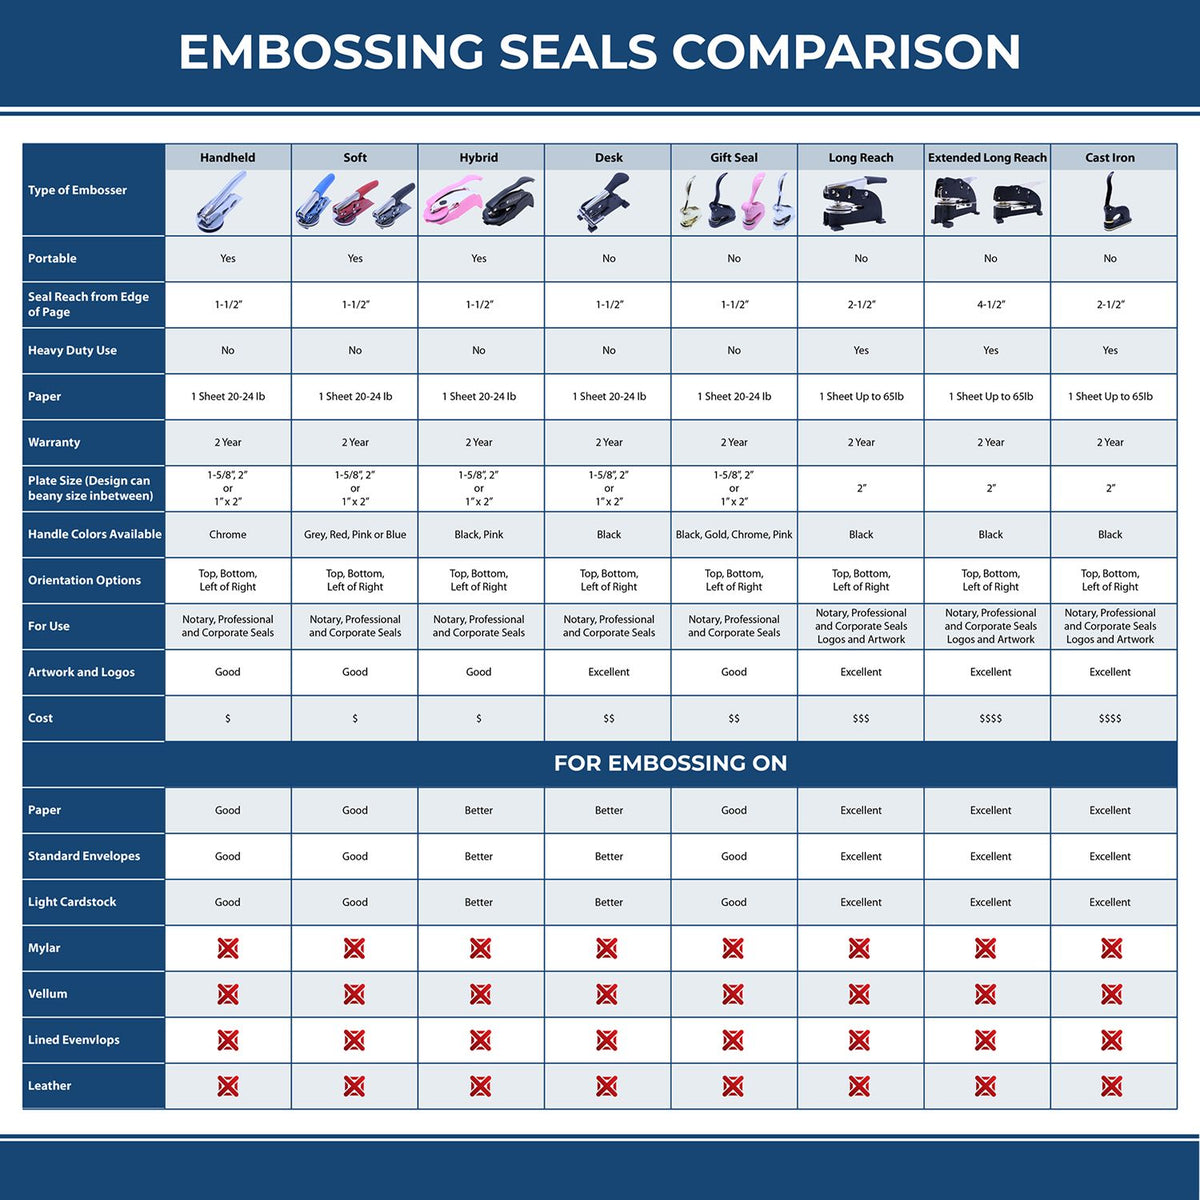 A comparison chart for the different types of mount models available for the Hybrid New York Land Surveyor Seal